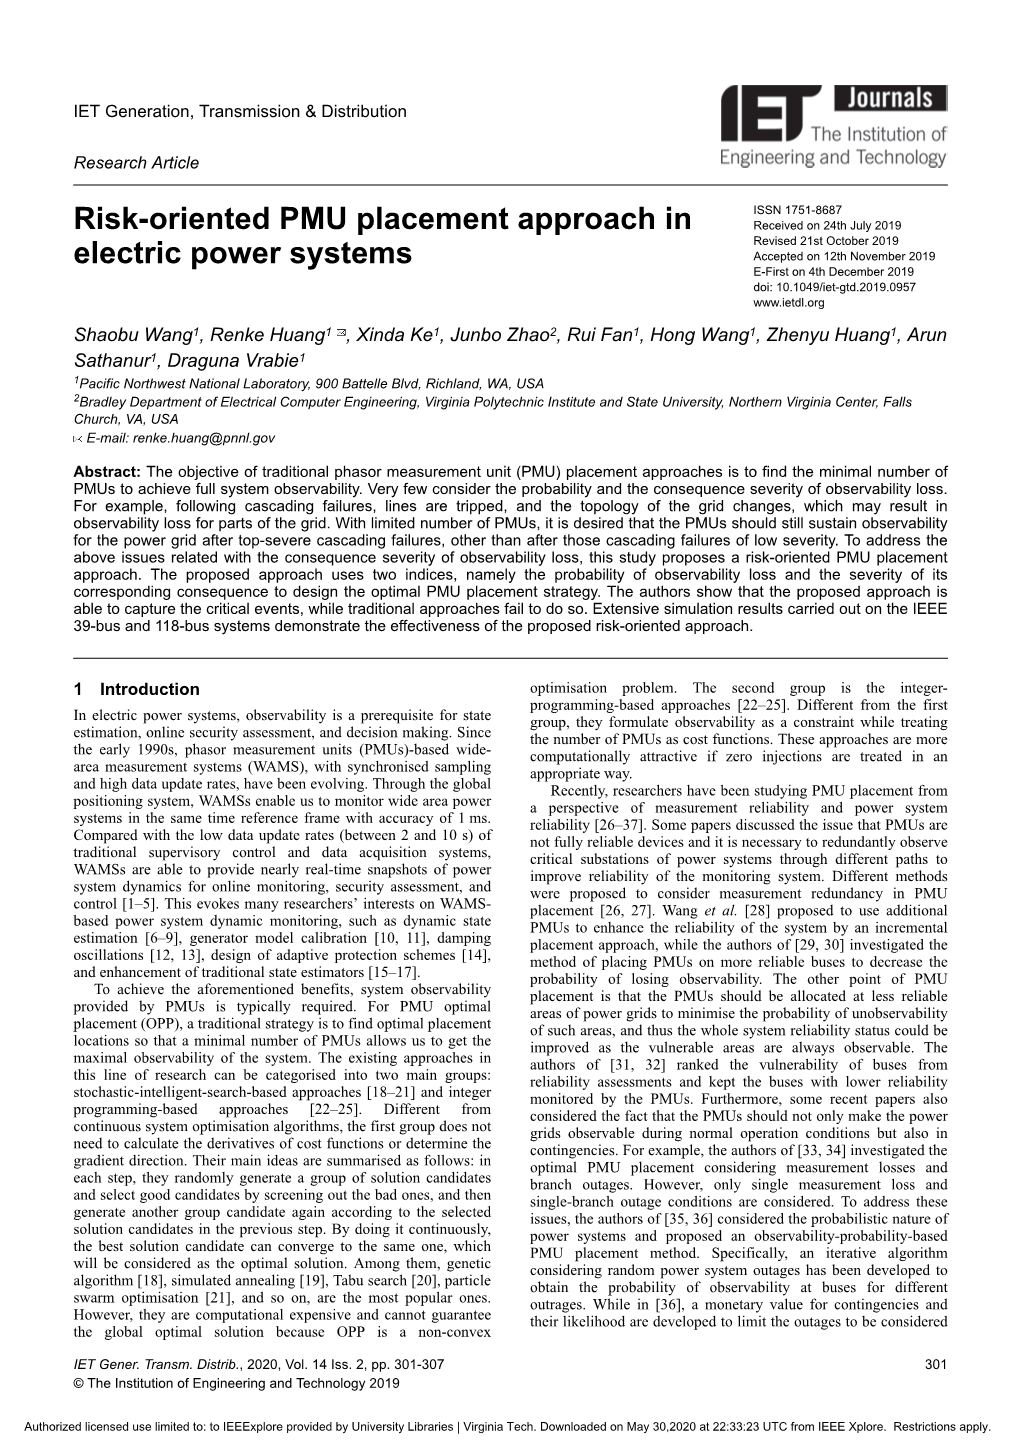 Risk-Oriented PMU Placement Approach in Electric Power Systems